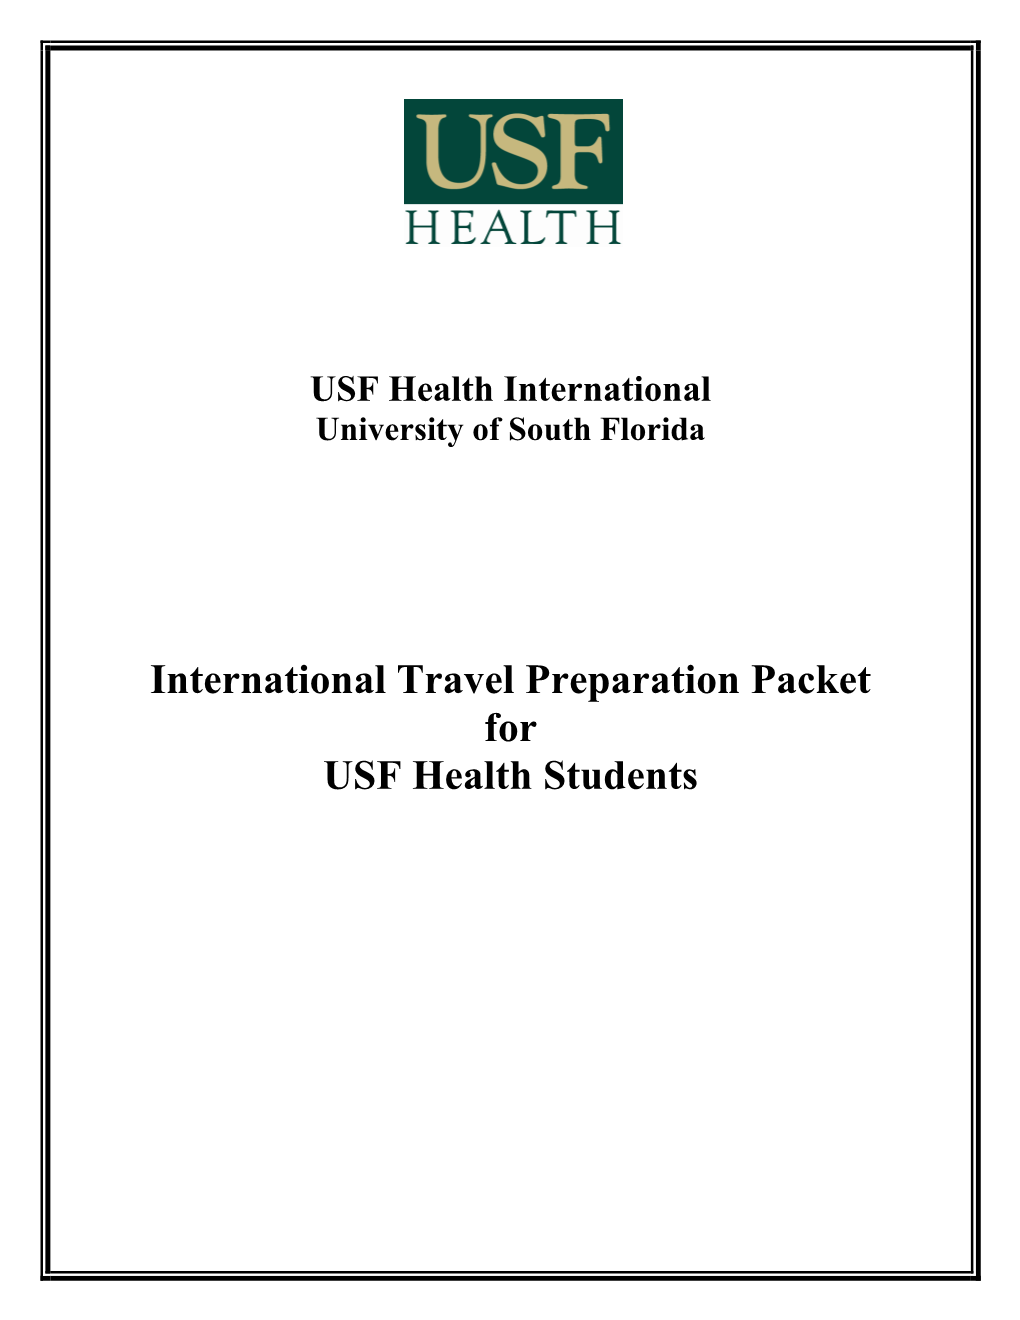 International Travel Preparation Packet for USF Health Students